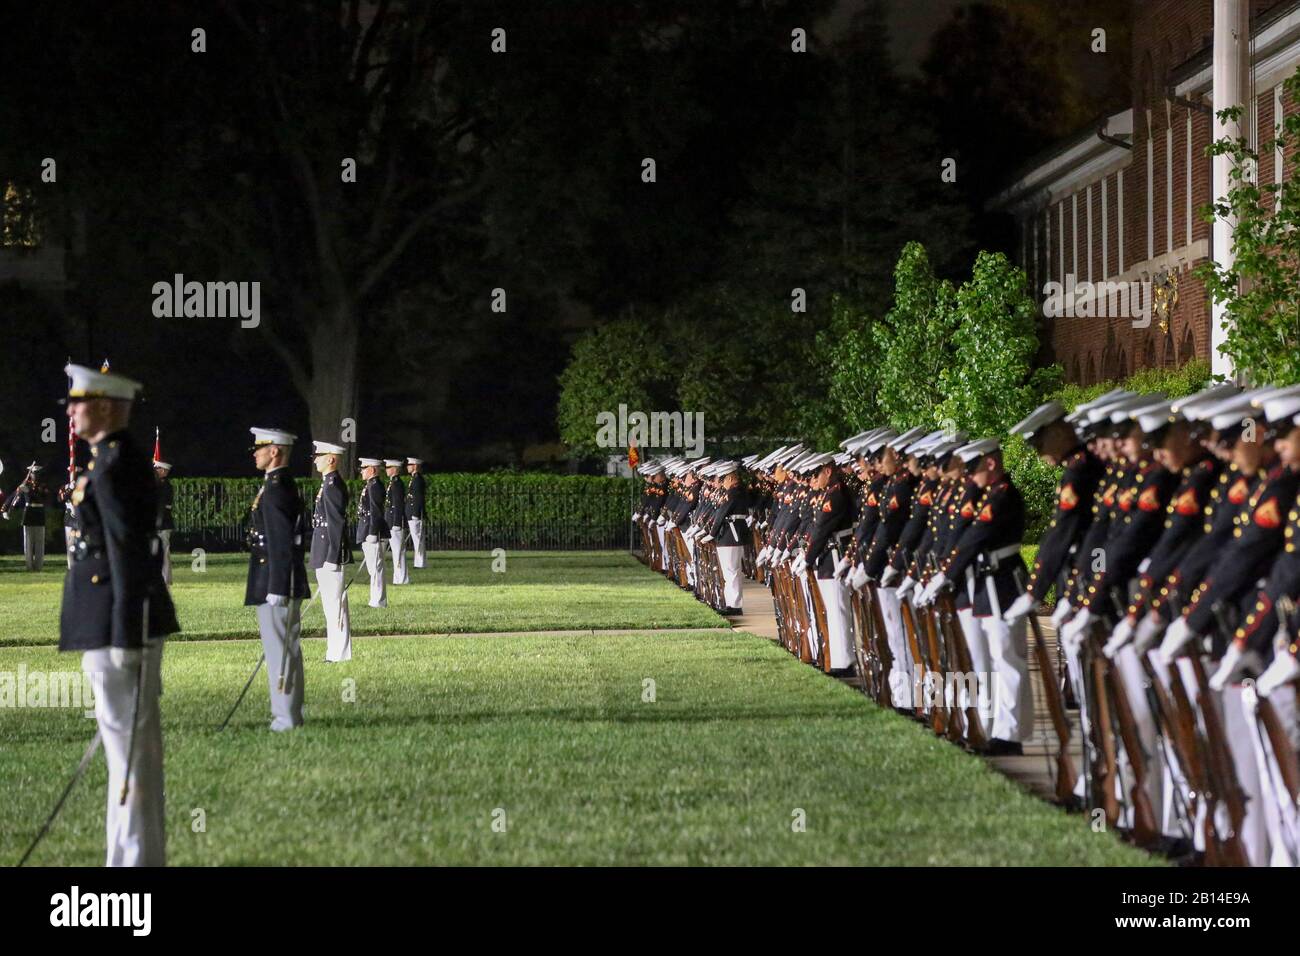 Marines with Alpha and Bravo marching companies, Marine Barracks Washington D.C., perform “fix bayonets” during a Friday Evening Parade at the Barracks, May 10, 2019.The guest of honor for the evening was the Honorable, David L. Norquist, Under Secretary of Defense (Comptroller)/Chief Financial Officer and performing the duties of the Deputy Secretary of Defense and the hosting official was the Assistant Commandant of the Marine Corps, Gen. Gary L. Thomas. (U.S. Marine Corps photo by Pfc. Allen Sanders) Stock Photo